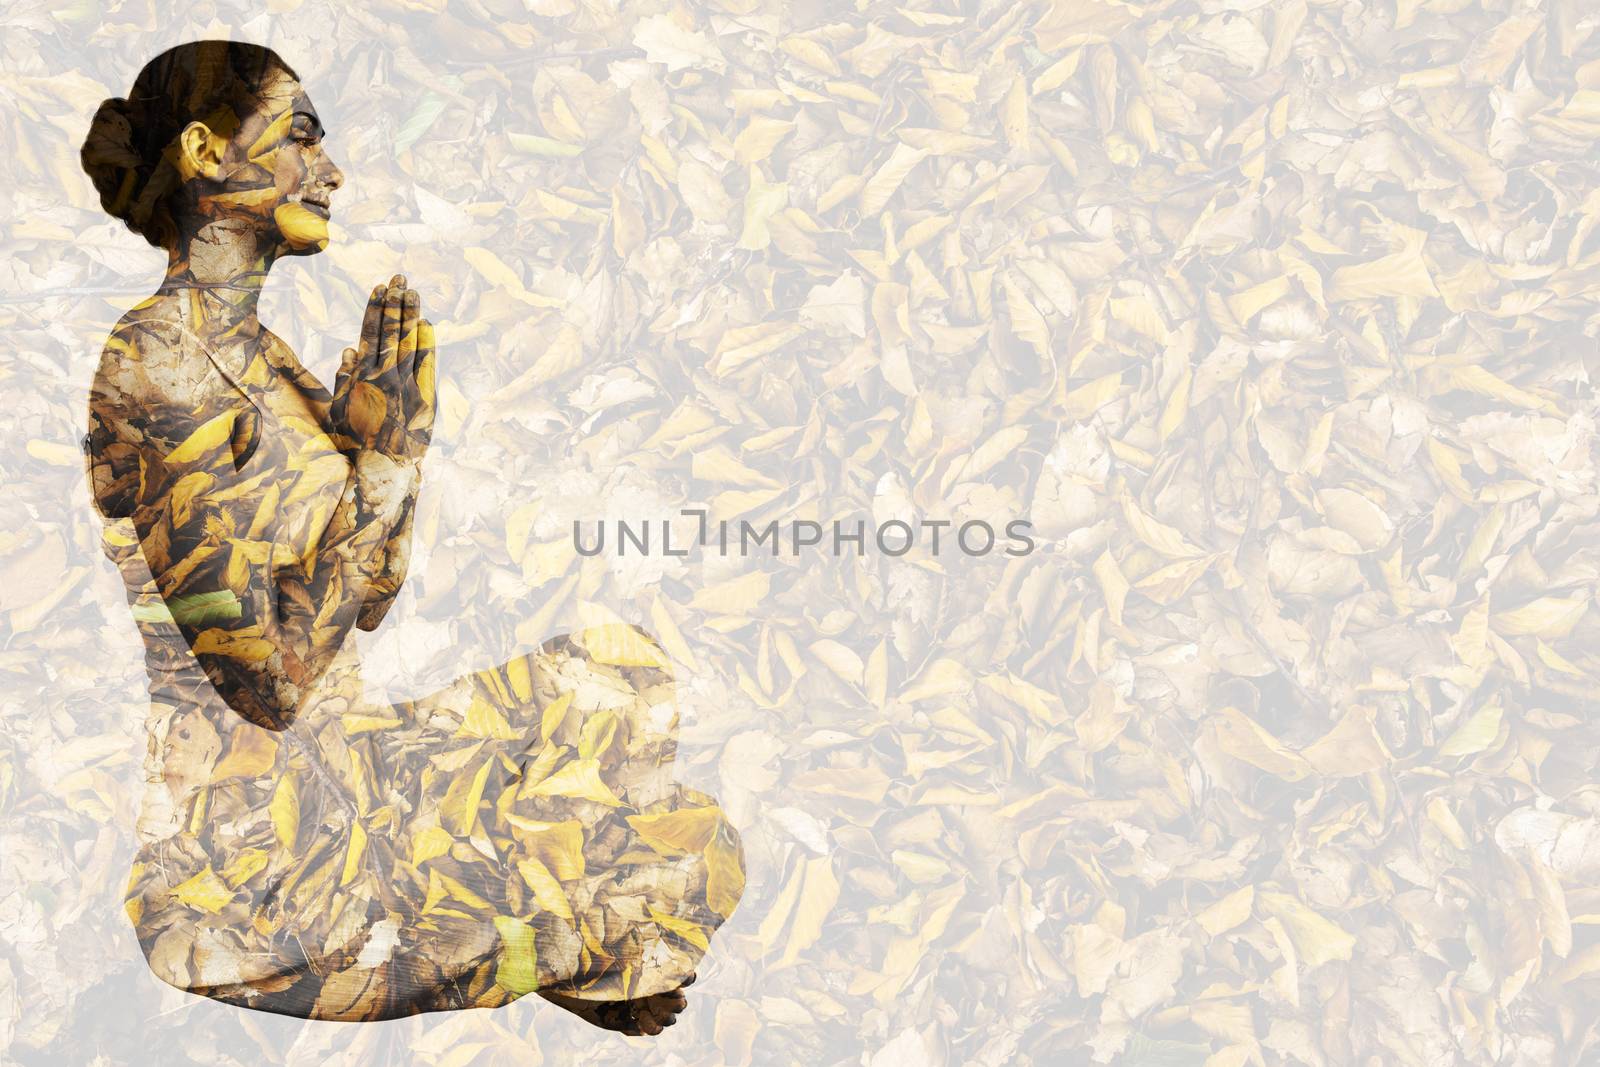 Content brunette in white sitting in lotus pose  against detail shot of dry leaves